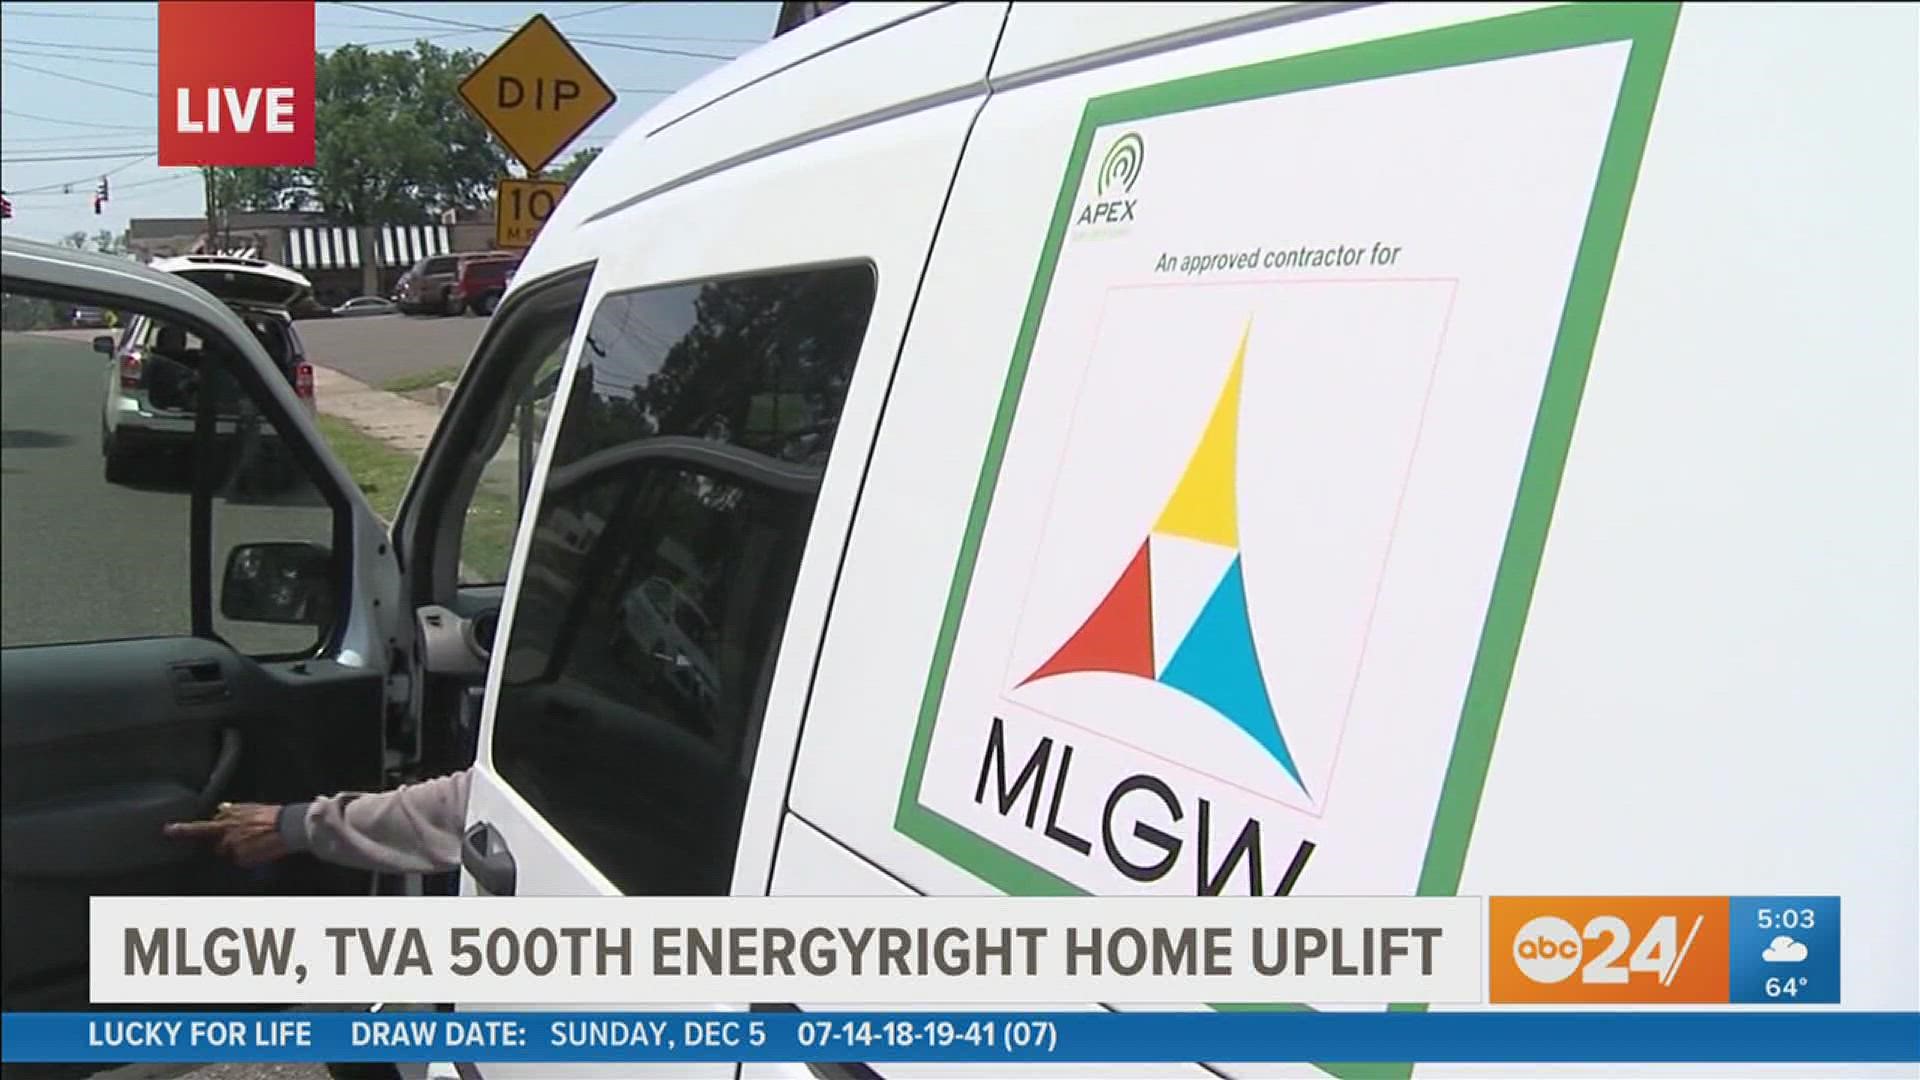 Low-income homes can qualify for an energy uplift program that upgrades appliances to save money on bills.